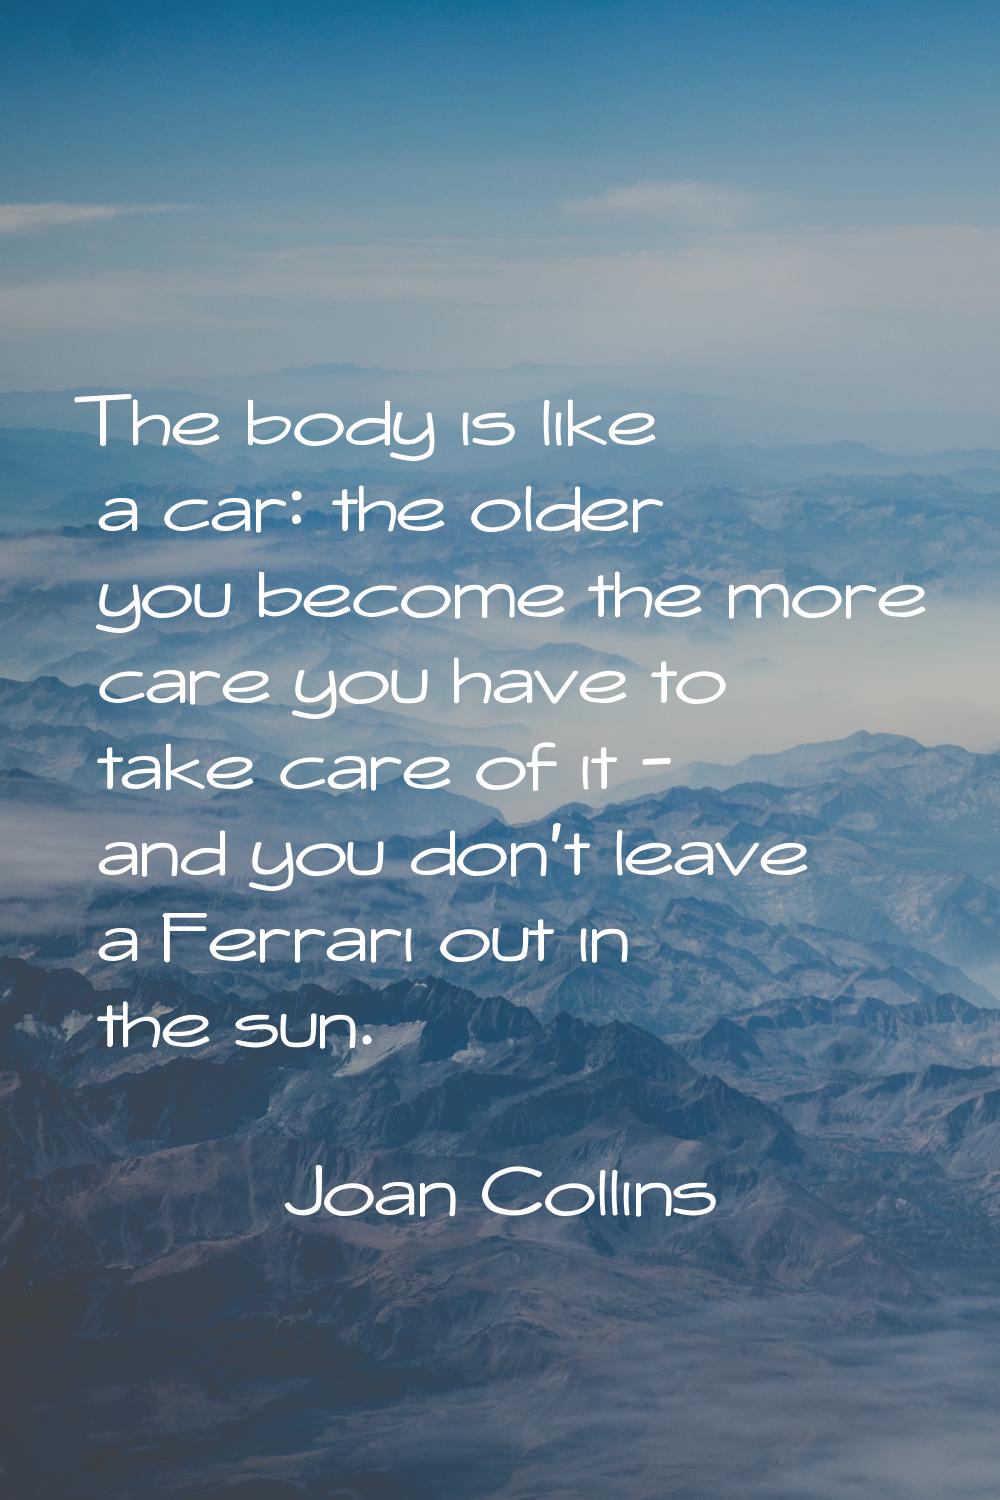 The body is like a car: the older you become the more care you have to take care of it - and you do